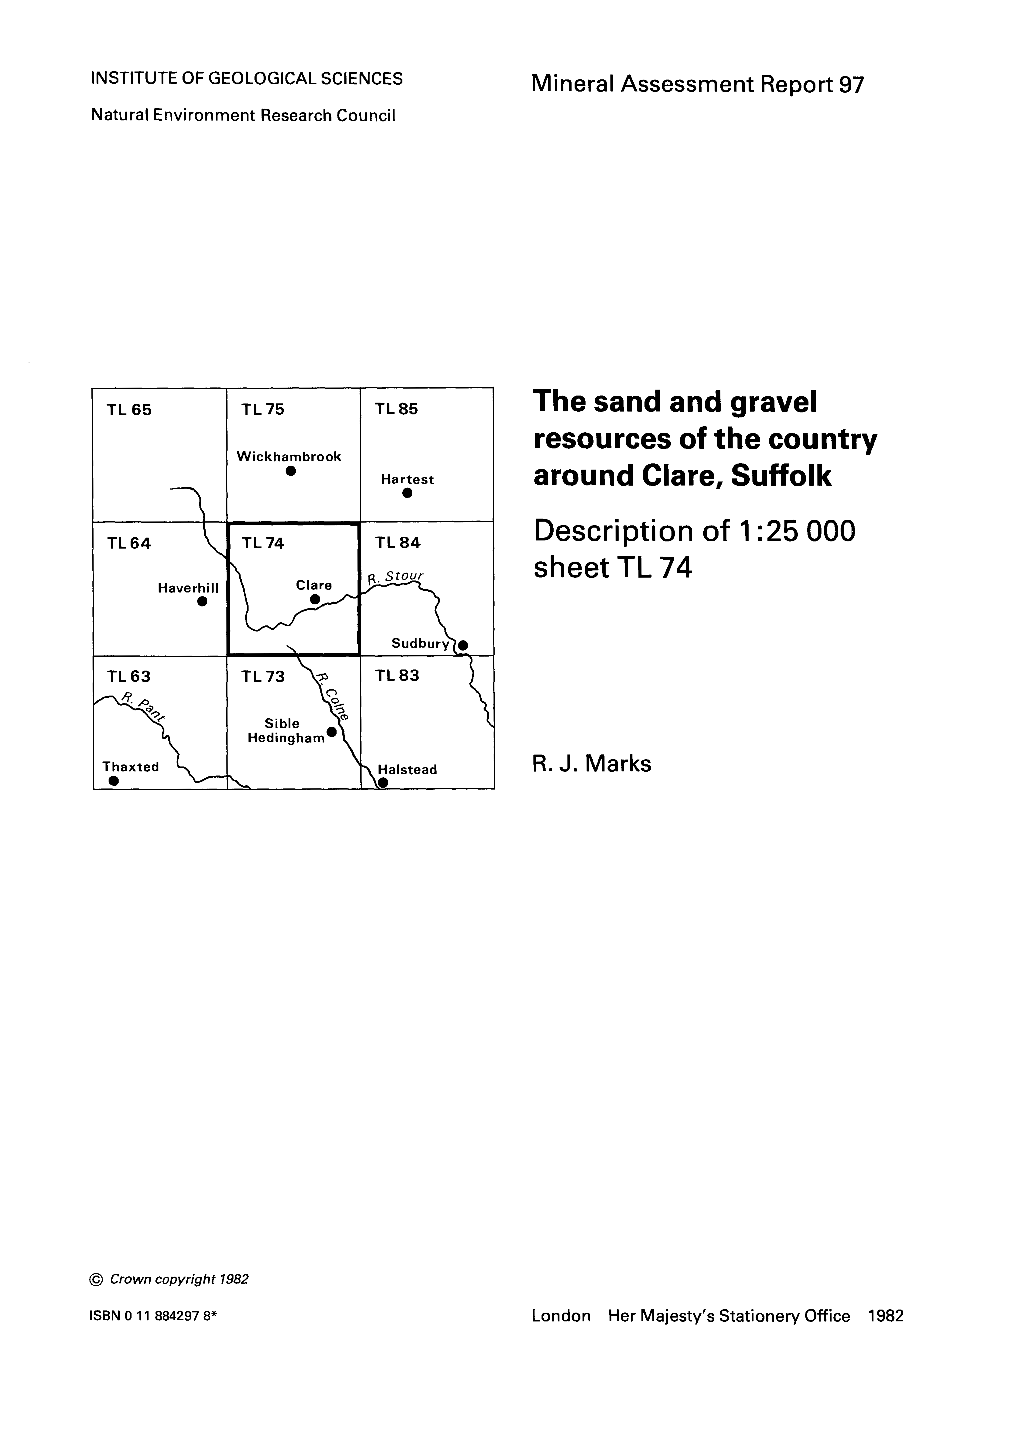 The Sand and Gravel Resources of the Country Around Clare, Suffolk